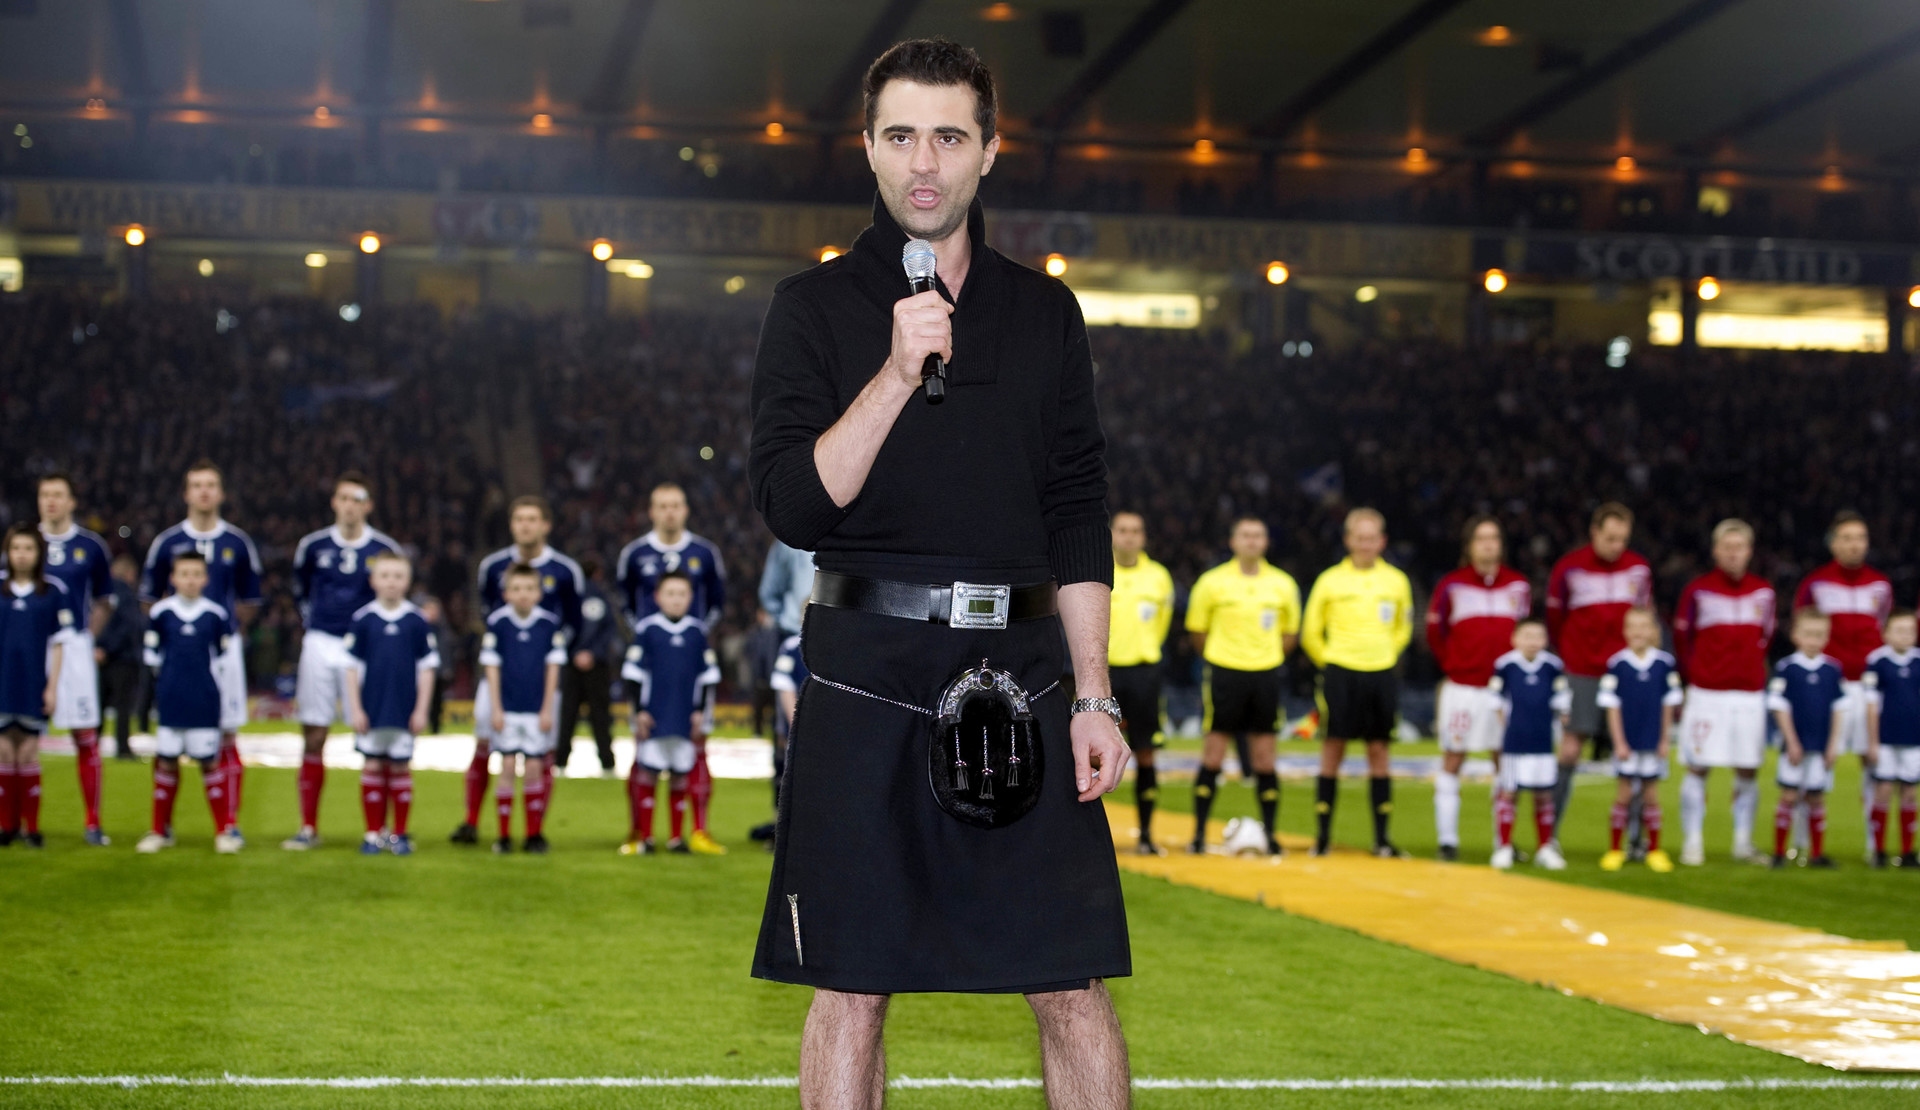 The Scottish Pop Idol star Darius Campbell sang the national anthem prior to kick-off at the Scotland vs Czech Republic friendly in March 2010.